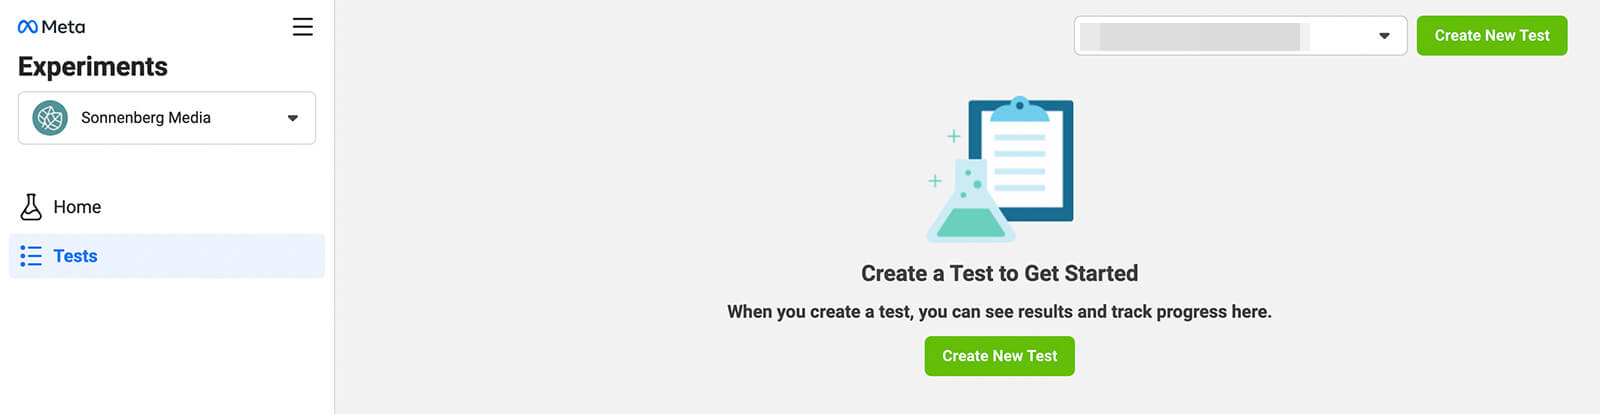 how-to-test-and-optimize-facebook-ad-campaigns-experiments-dashboard-follow-up-tests-creatives-audiences-placements-campaigns-ad-sets-and-ads-meta-example-3